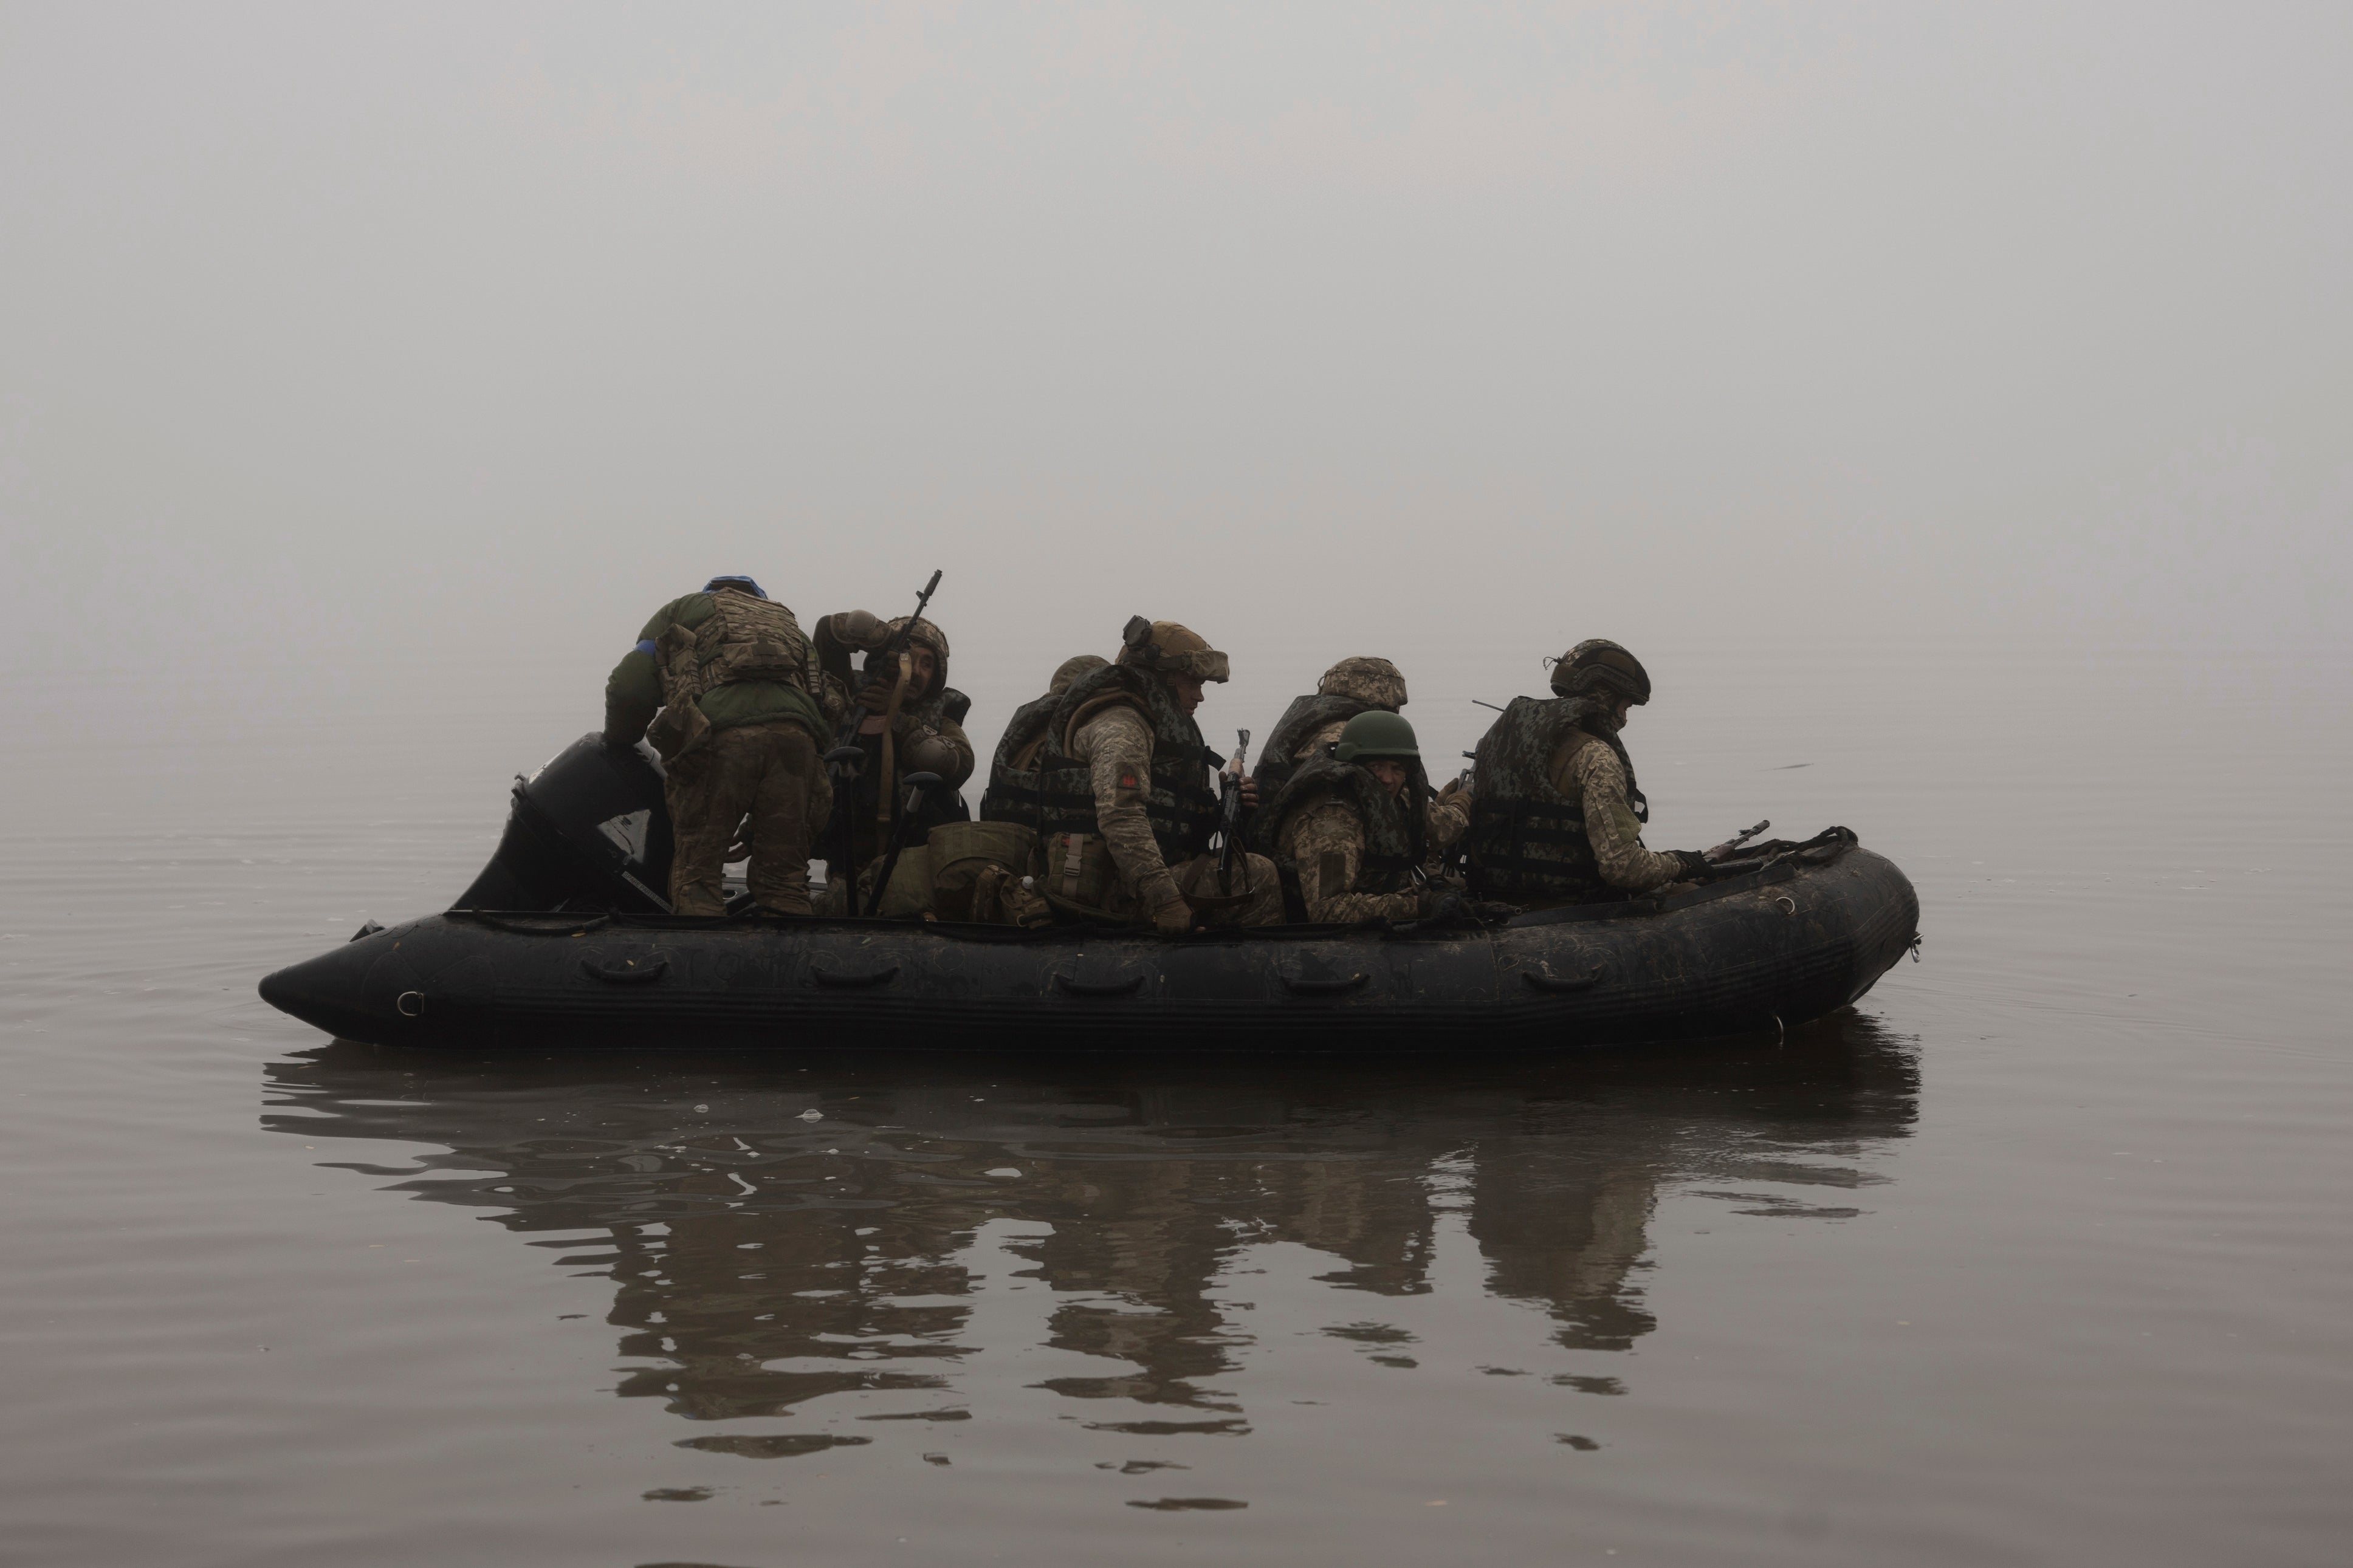 Ukrainian marines sail along the Dnipro River at the frontline near Kherson last month